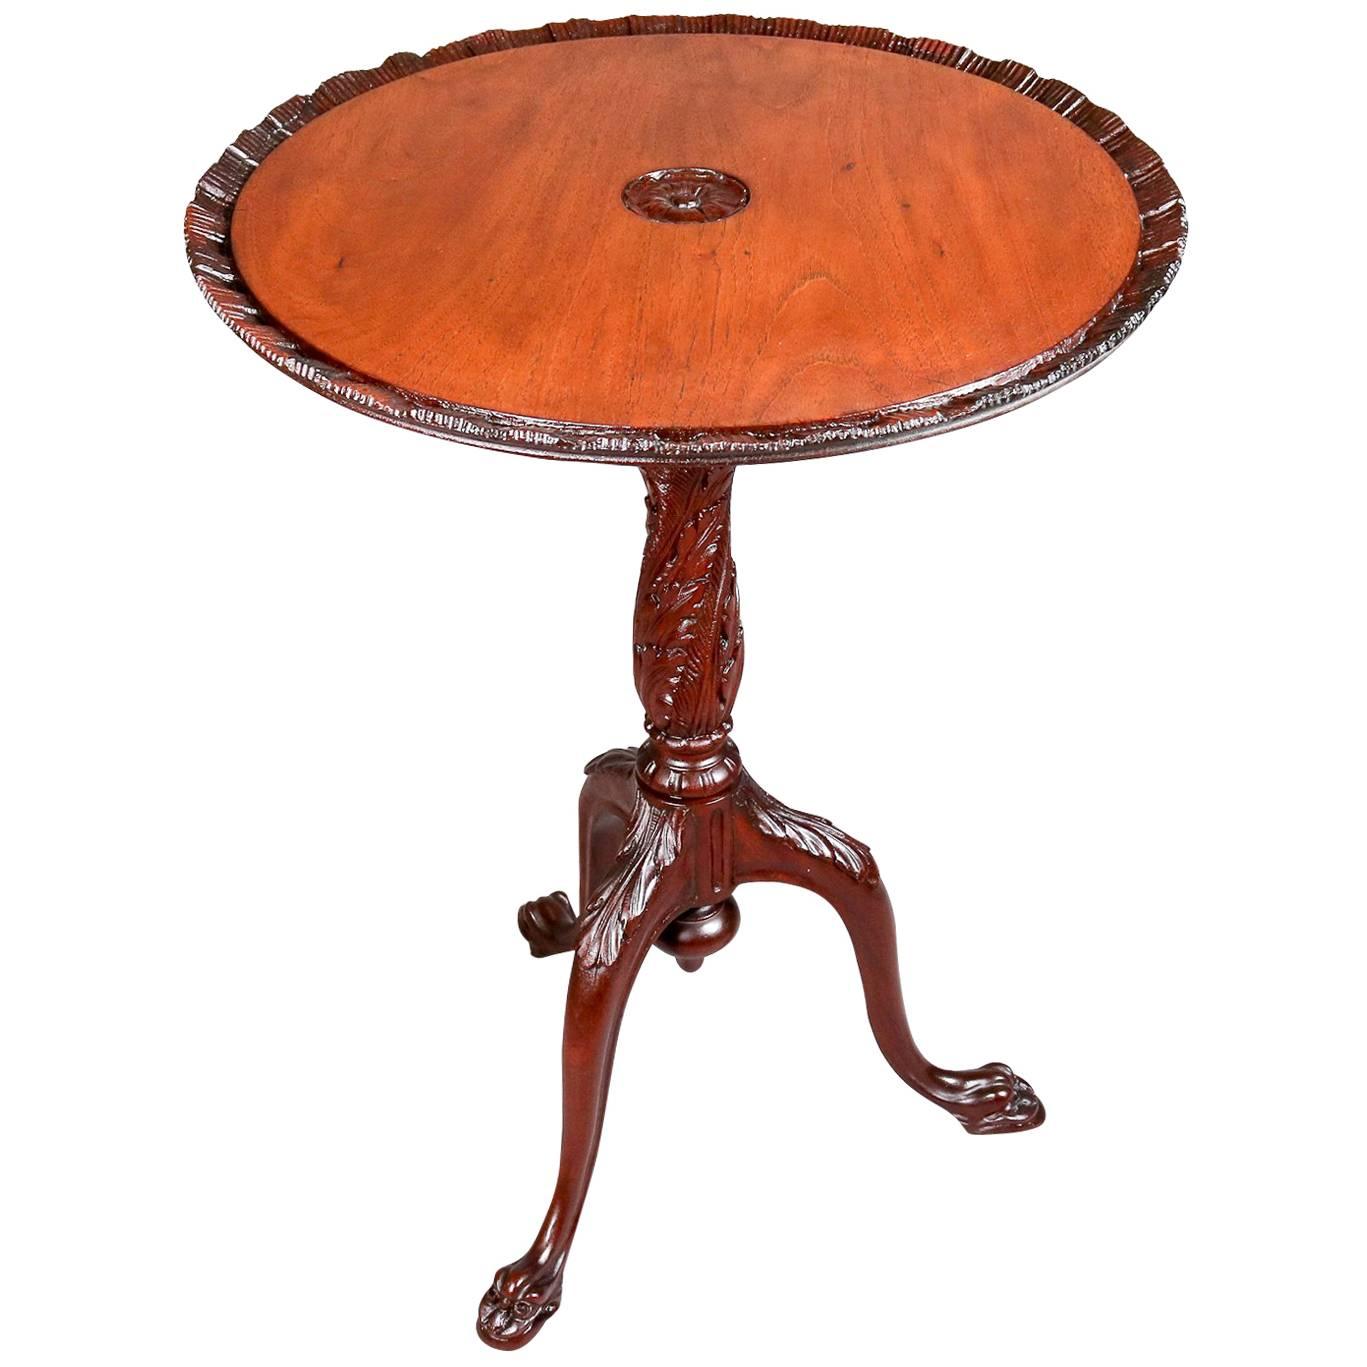 Antique Carved Mahogany Figural Tilt Top Pie Crust Table with Acanthus